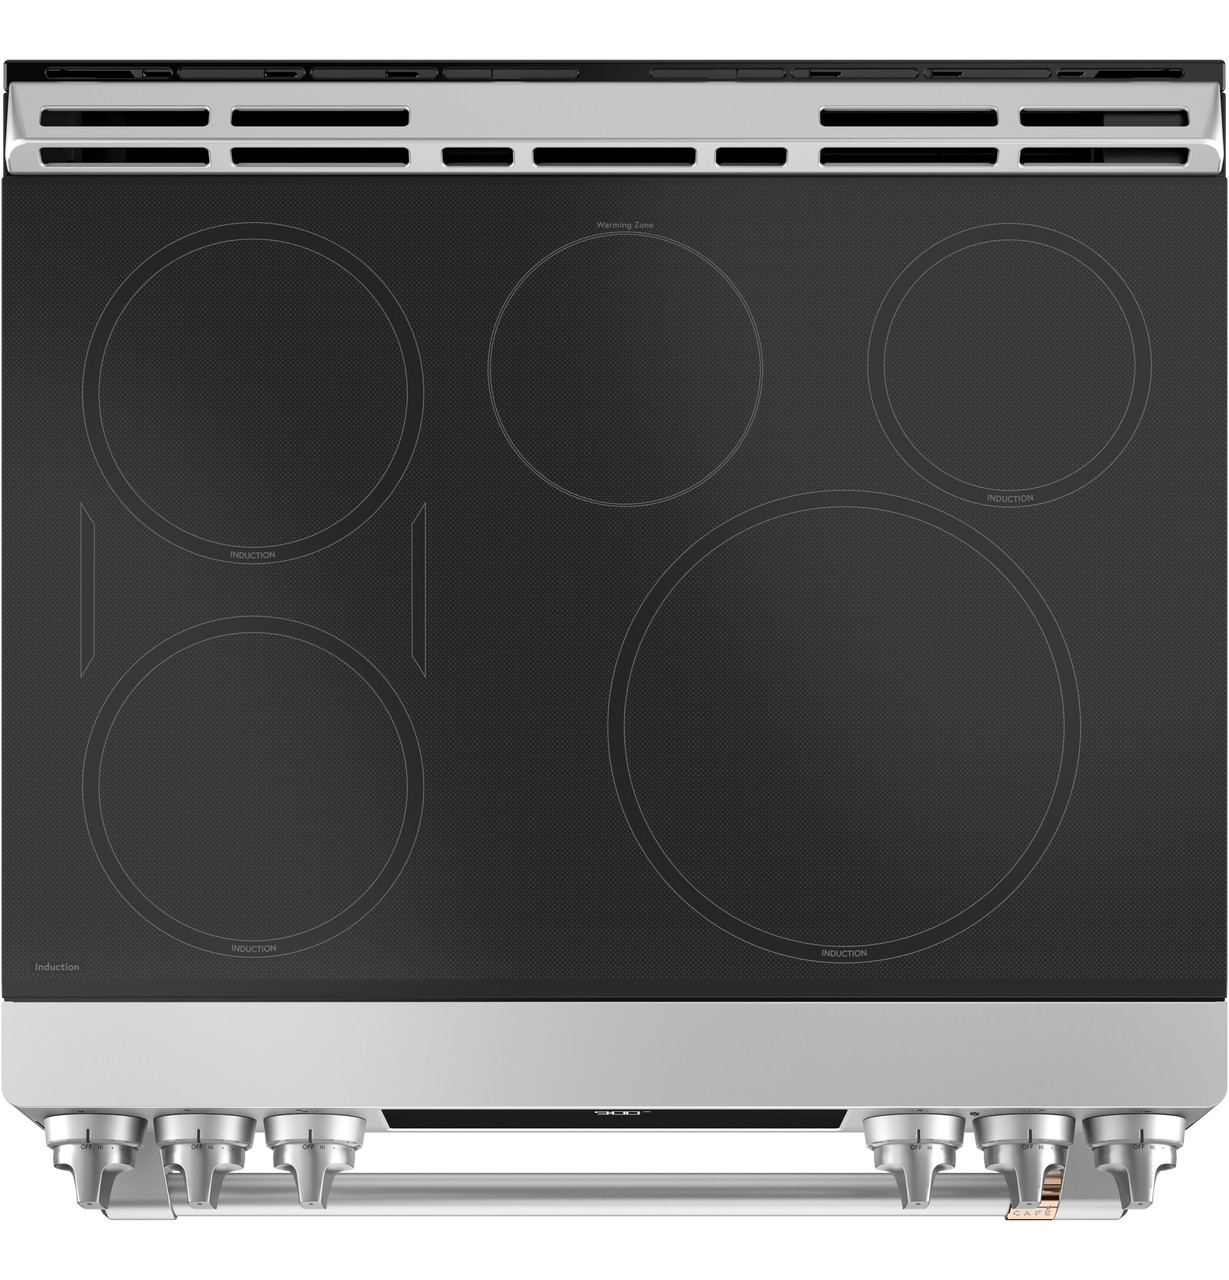 Induction Cooktop - Professional Heavy Duty - 1800W - Stainless Steel - 1  Count Box